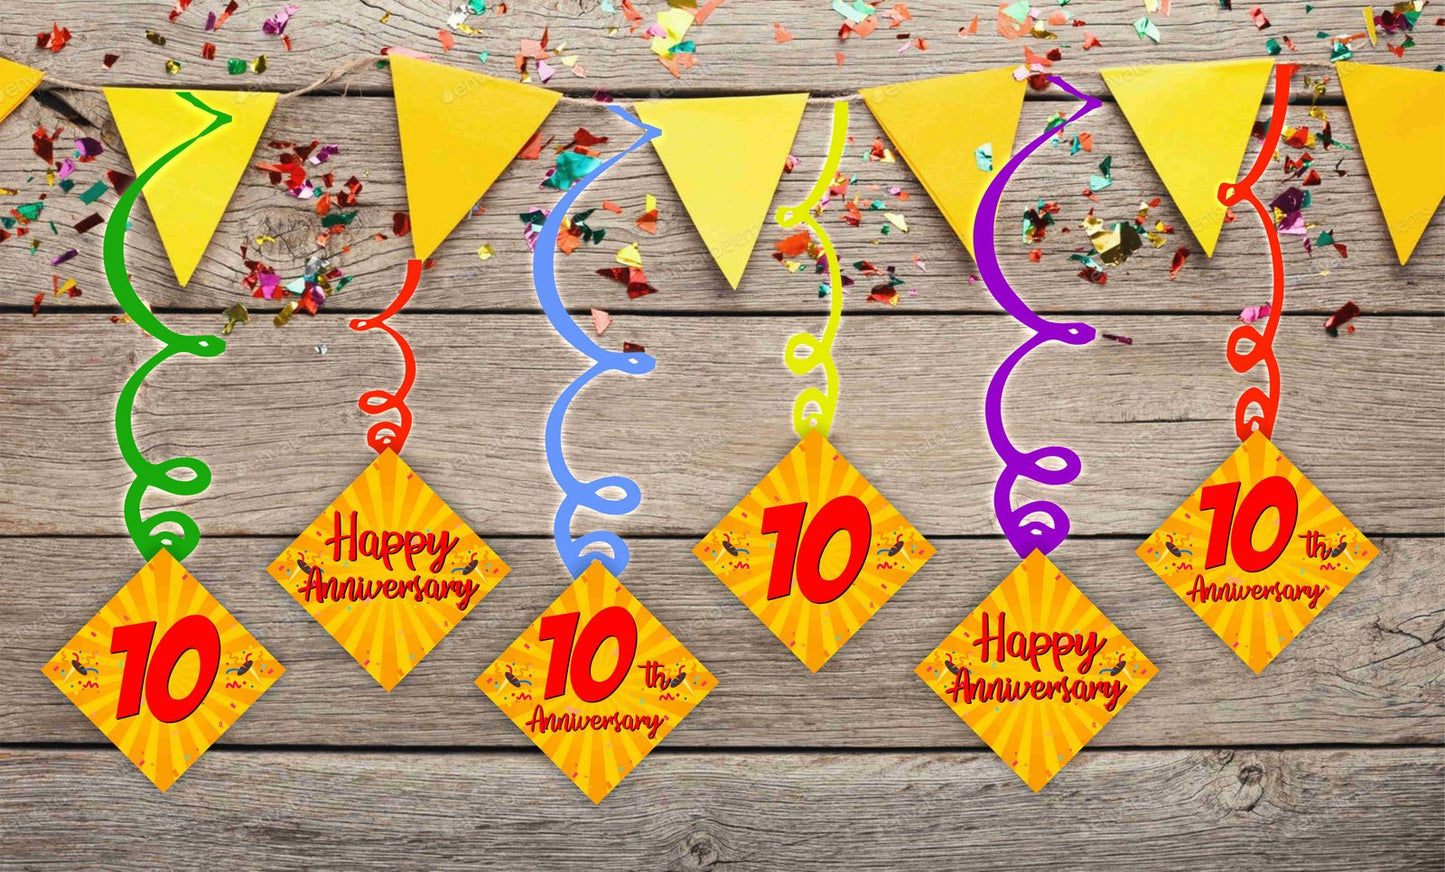 10th Anniversary Ceiling Hanging Swirls Decorations Cutout Festive Party Supplies (Pack of 6 swirls and cutout)